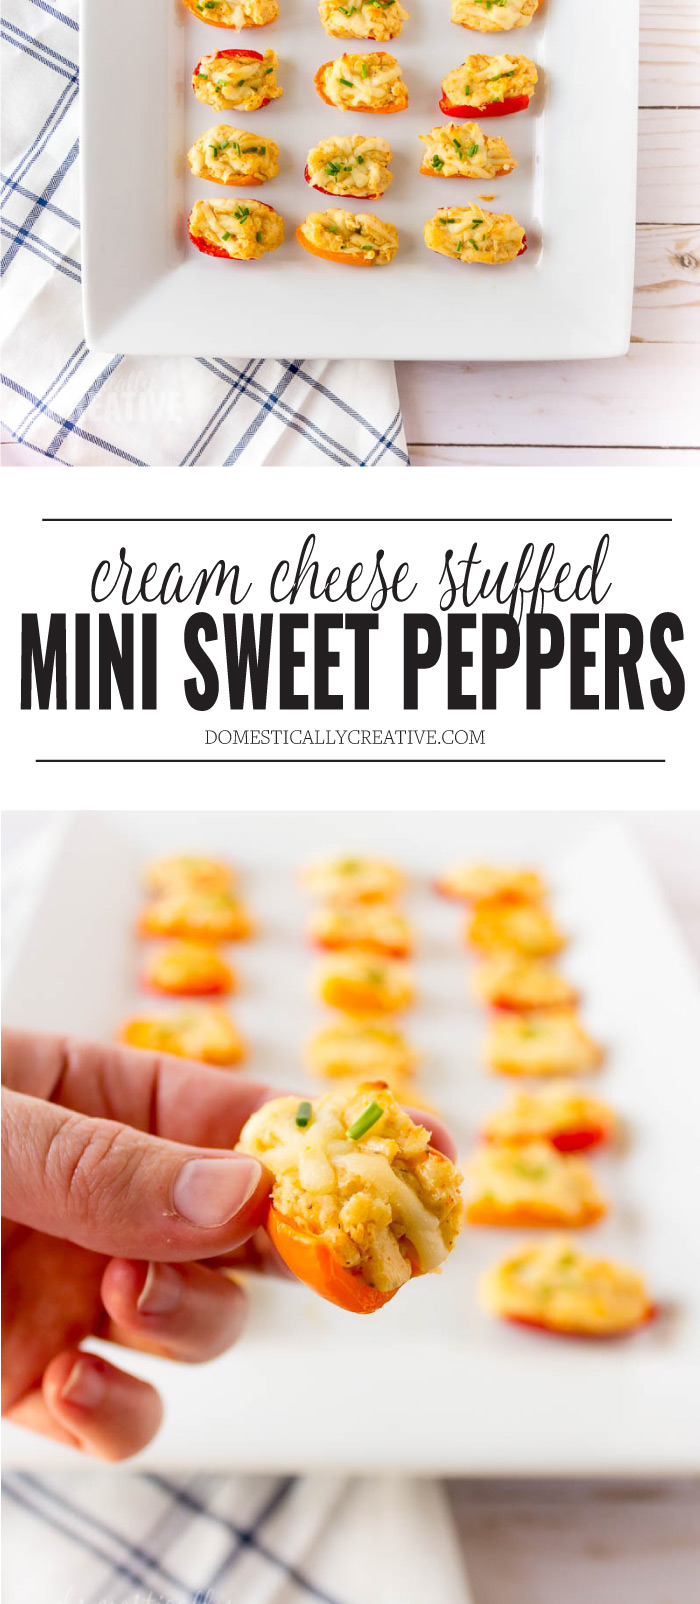 Easy game day recipe for cream cheese stuffed sweet peppers #gamedayrecipe #fingerfoods #creamcheesestuffedpeppers